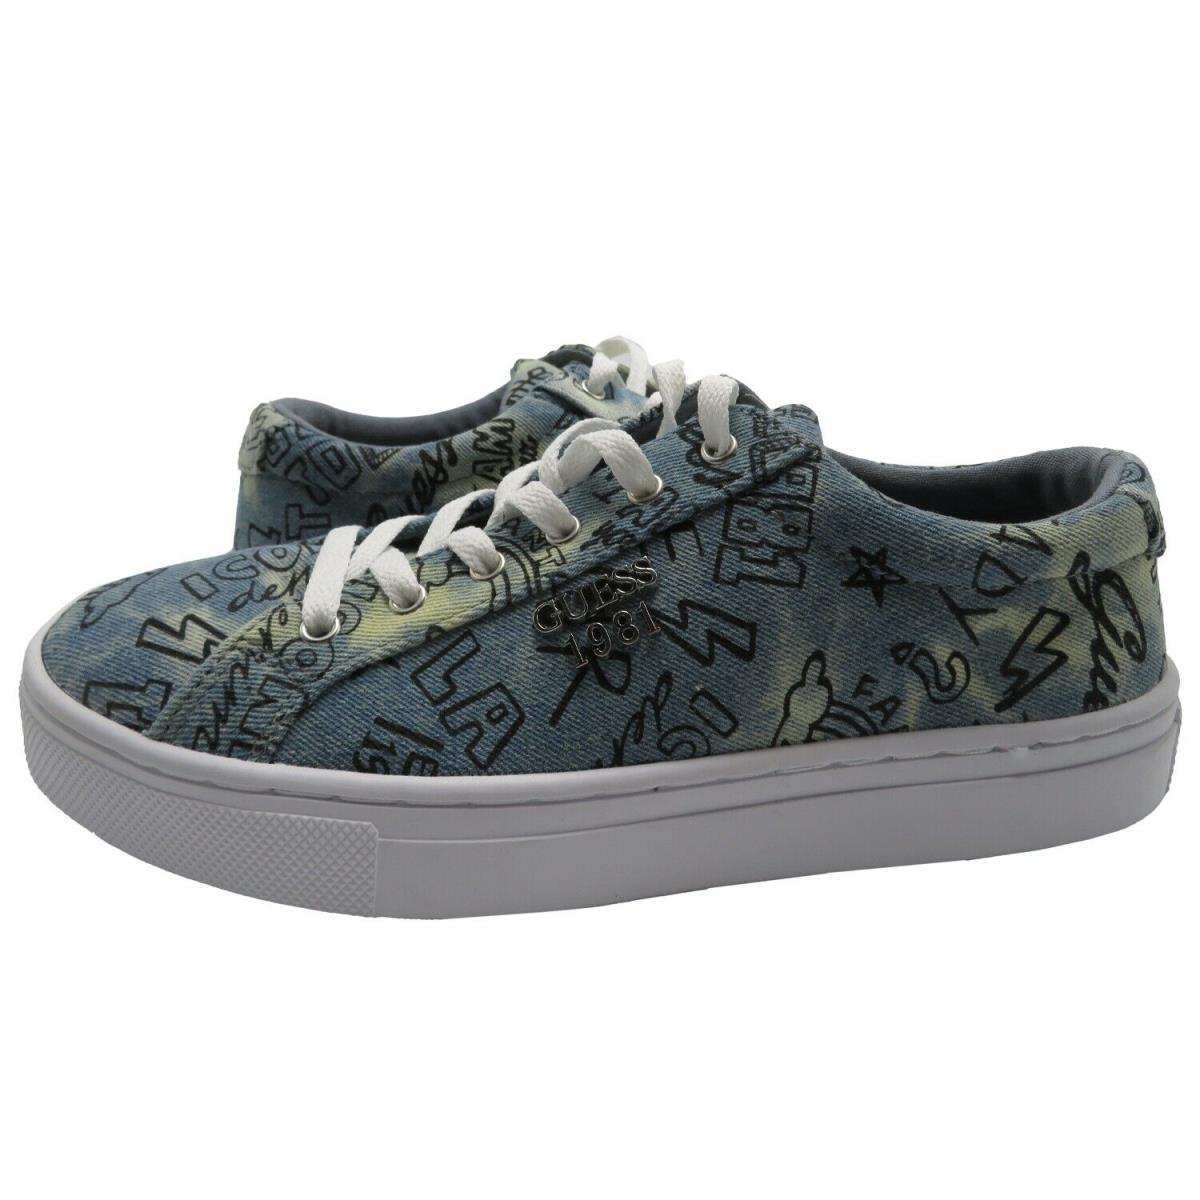 Guess Jaidy Graffiti Low-top Sneakers Size: 10